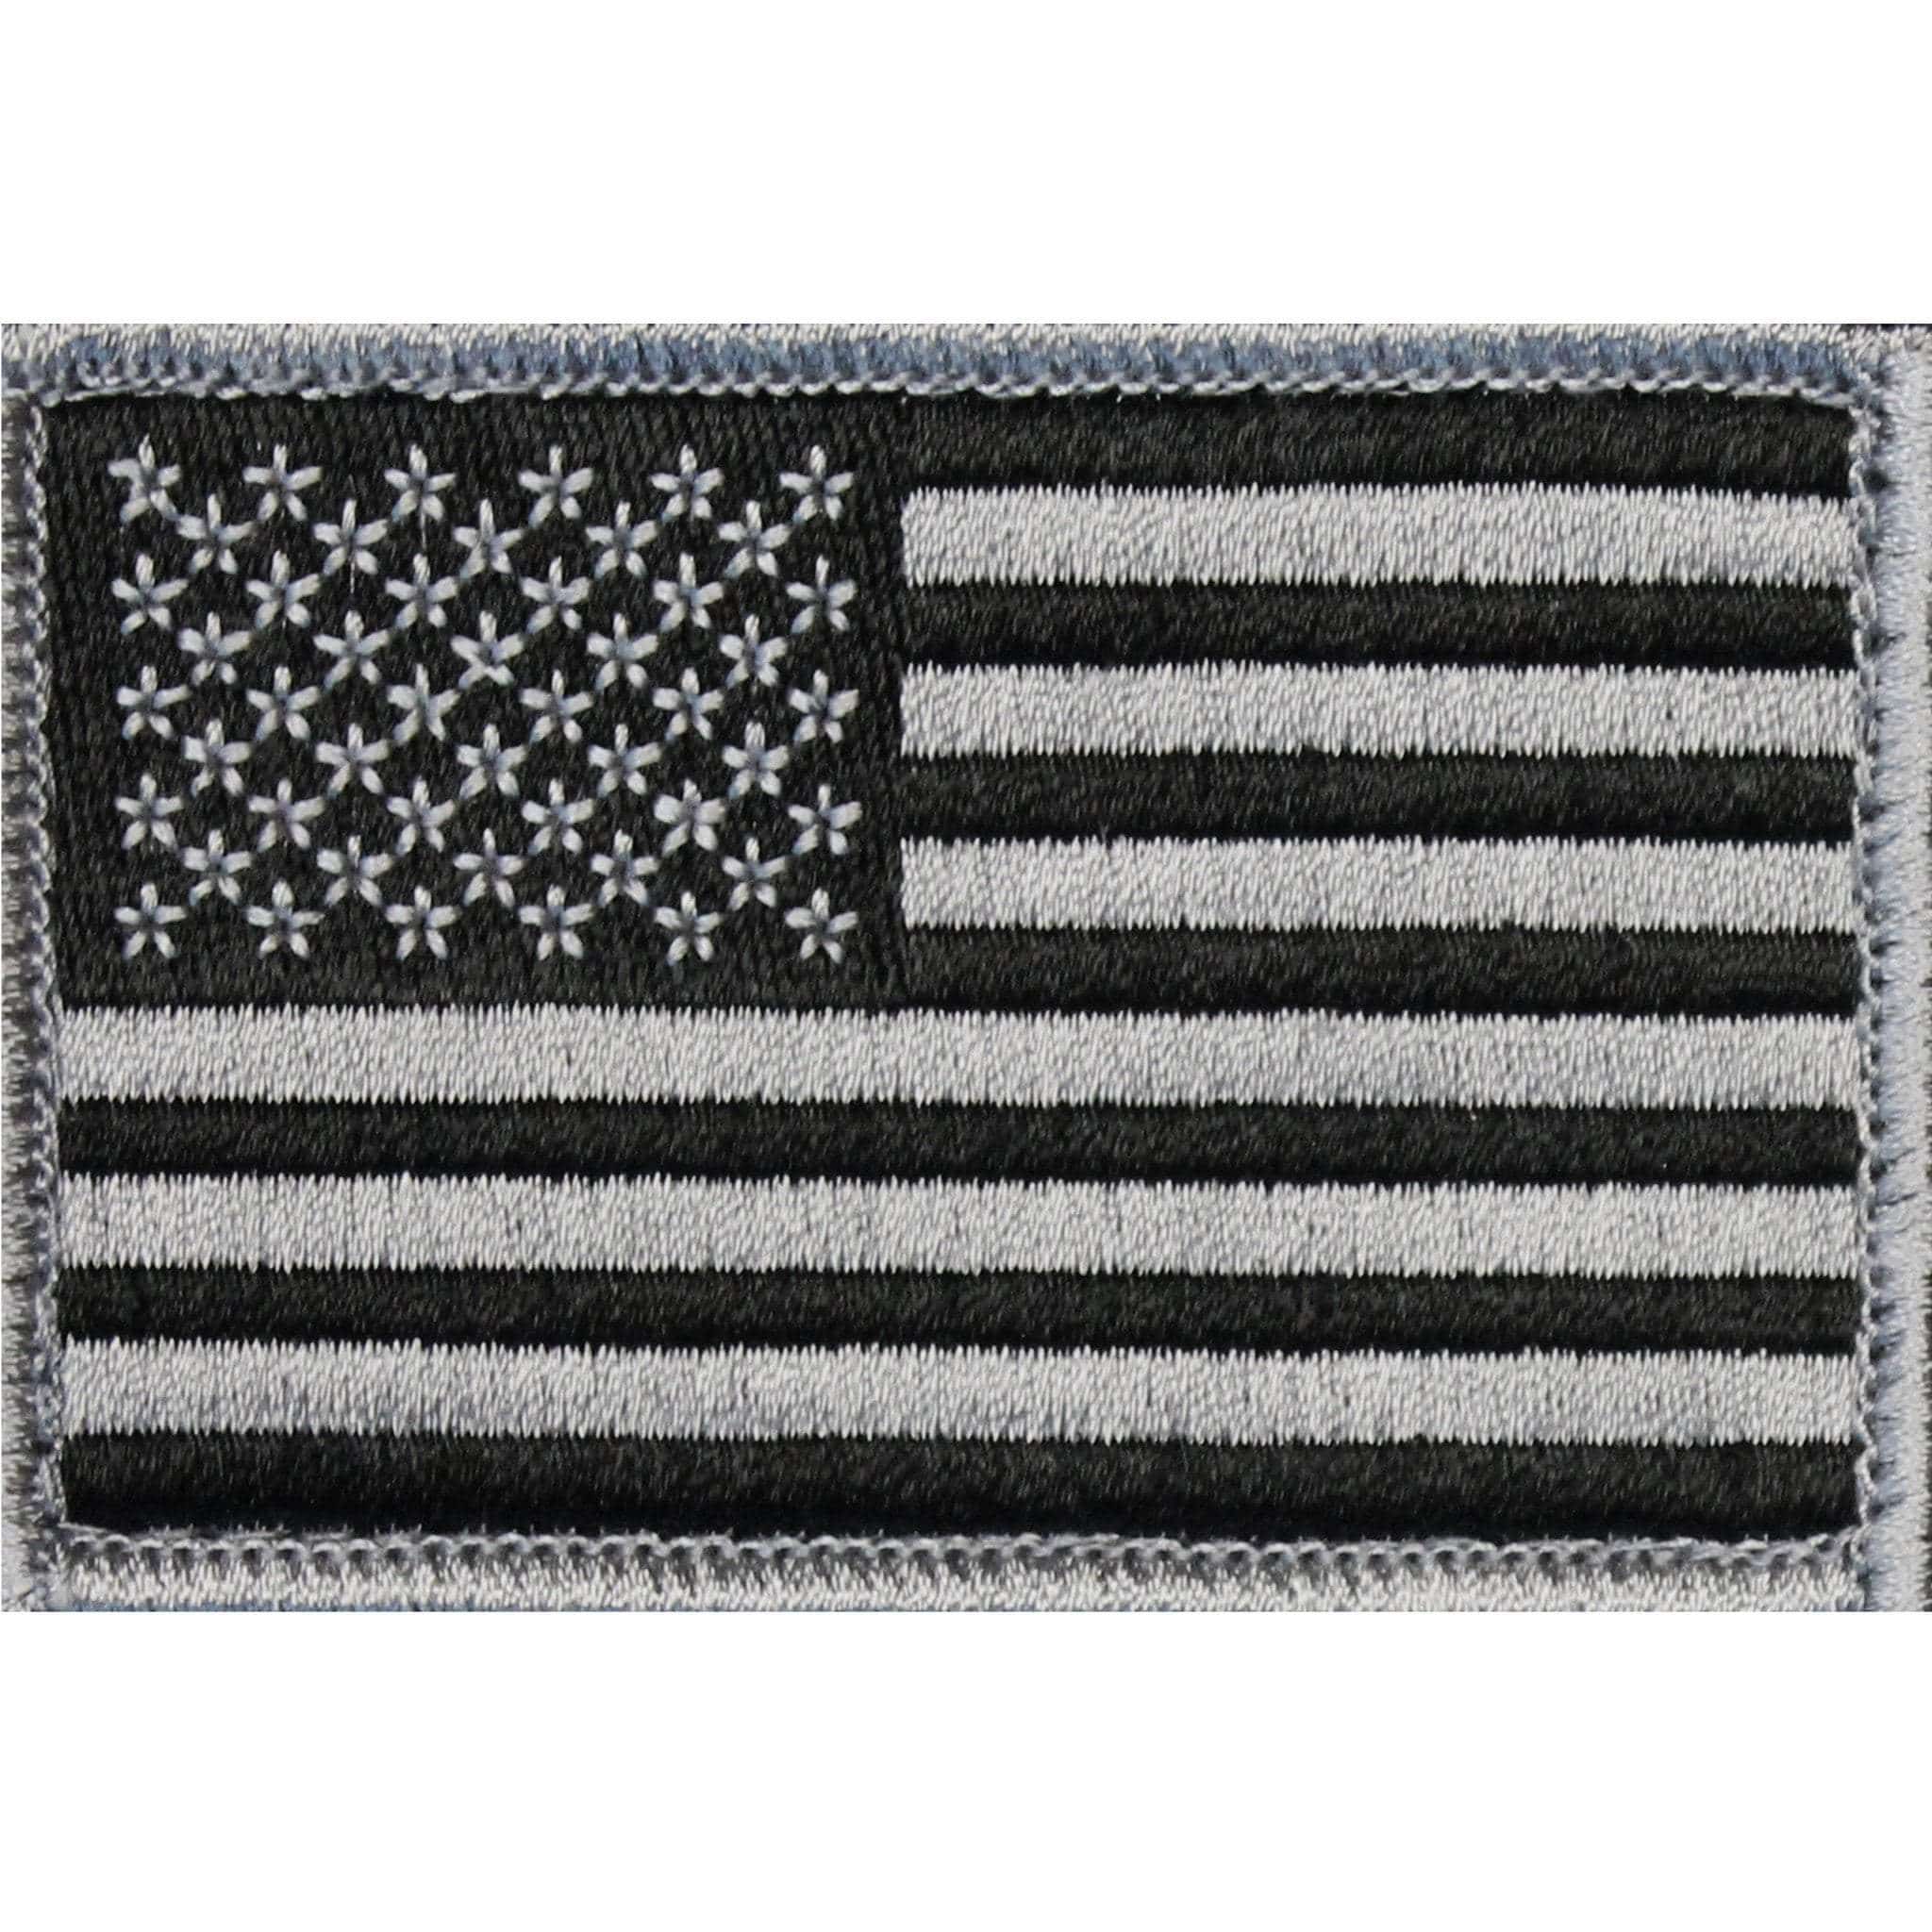 Thin Blue Line Flag Patch, Embroidered 2 x 3 Morale Patch w